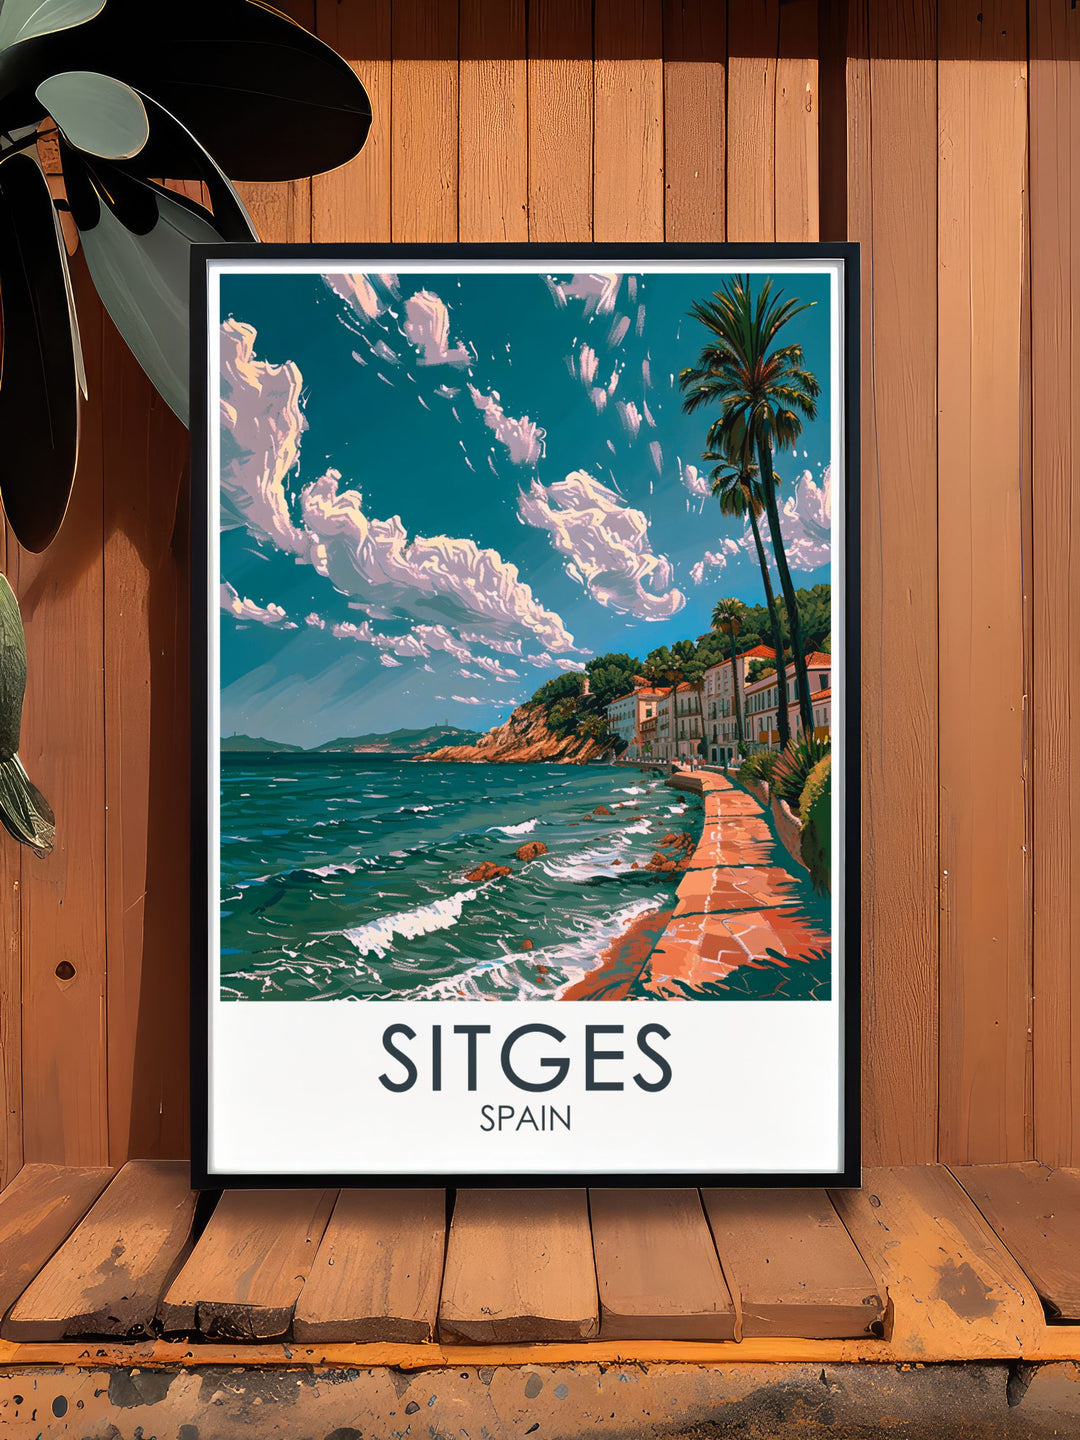 This vintage inspired poster of Sitges captures the timeless beauty of its historic streets and stunning Promenade, offering a glimpse into one of Spains most beloved seaside destinations.